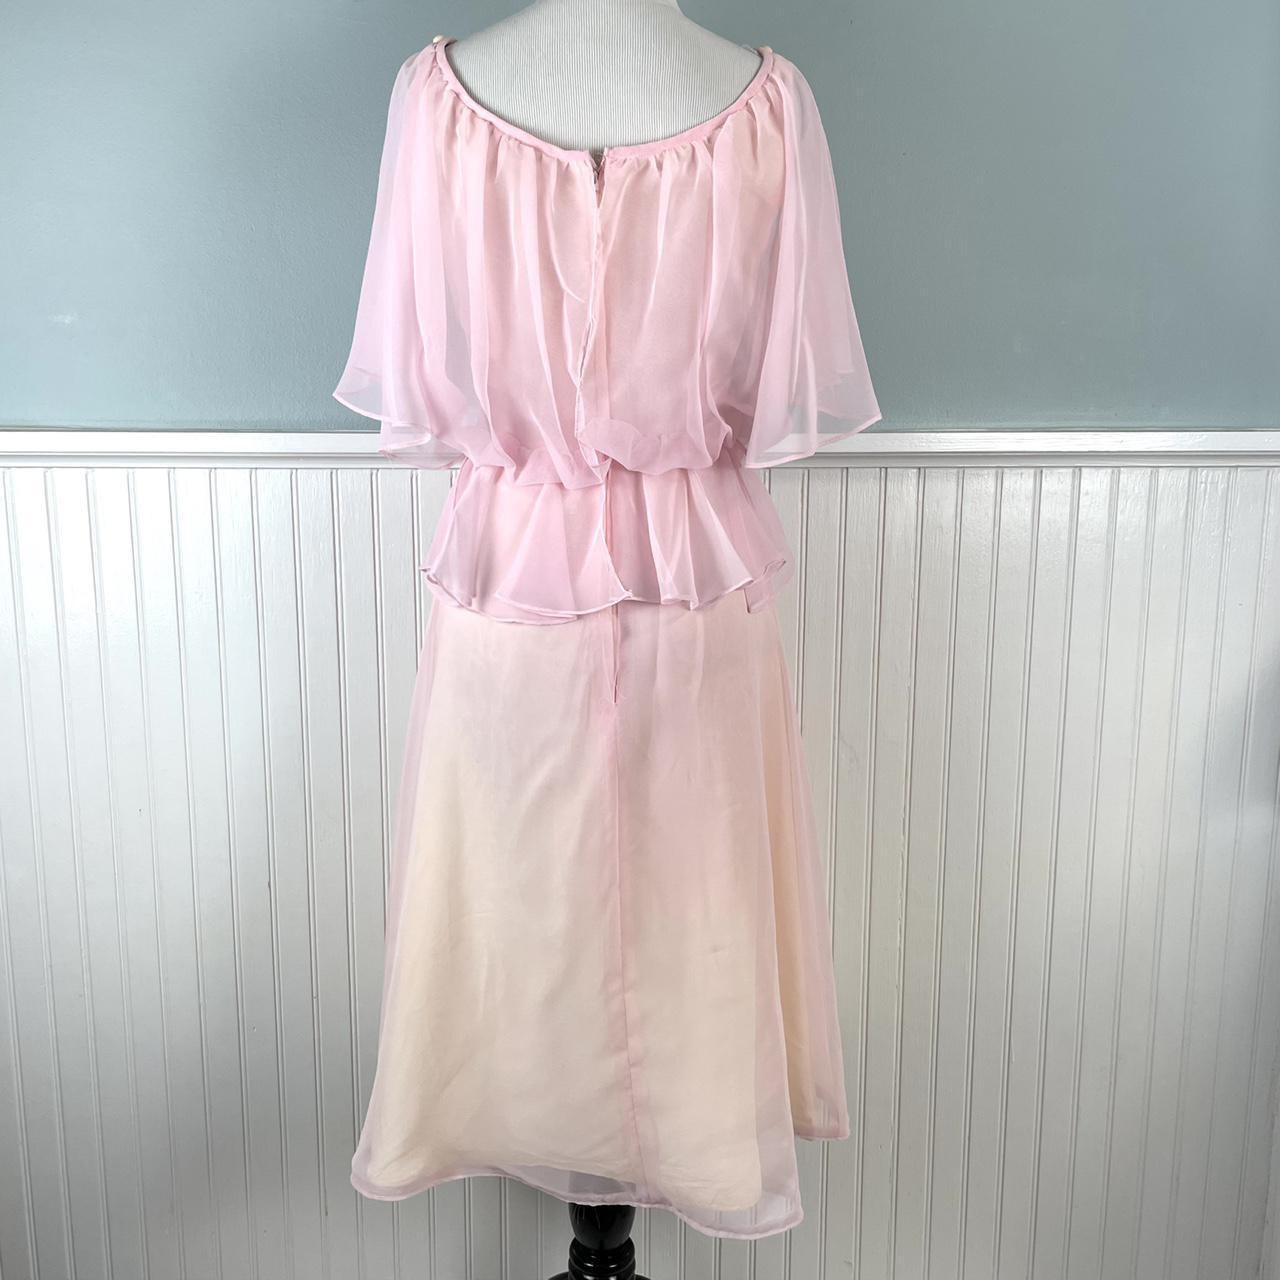 Product Image 3 - Vintage 70s pink layered fairy